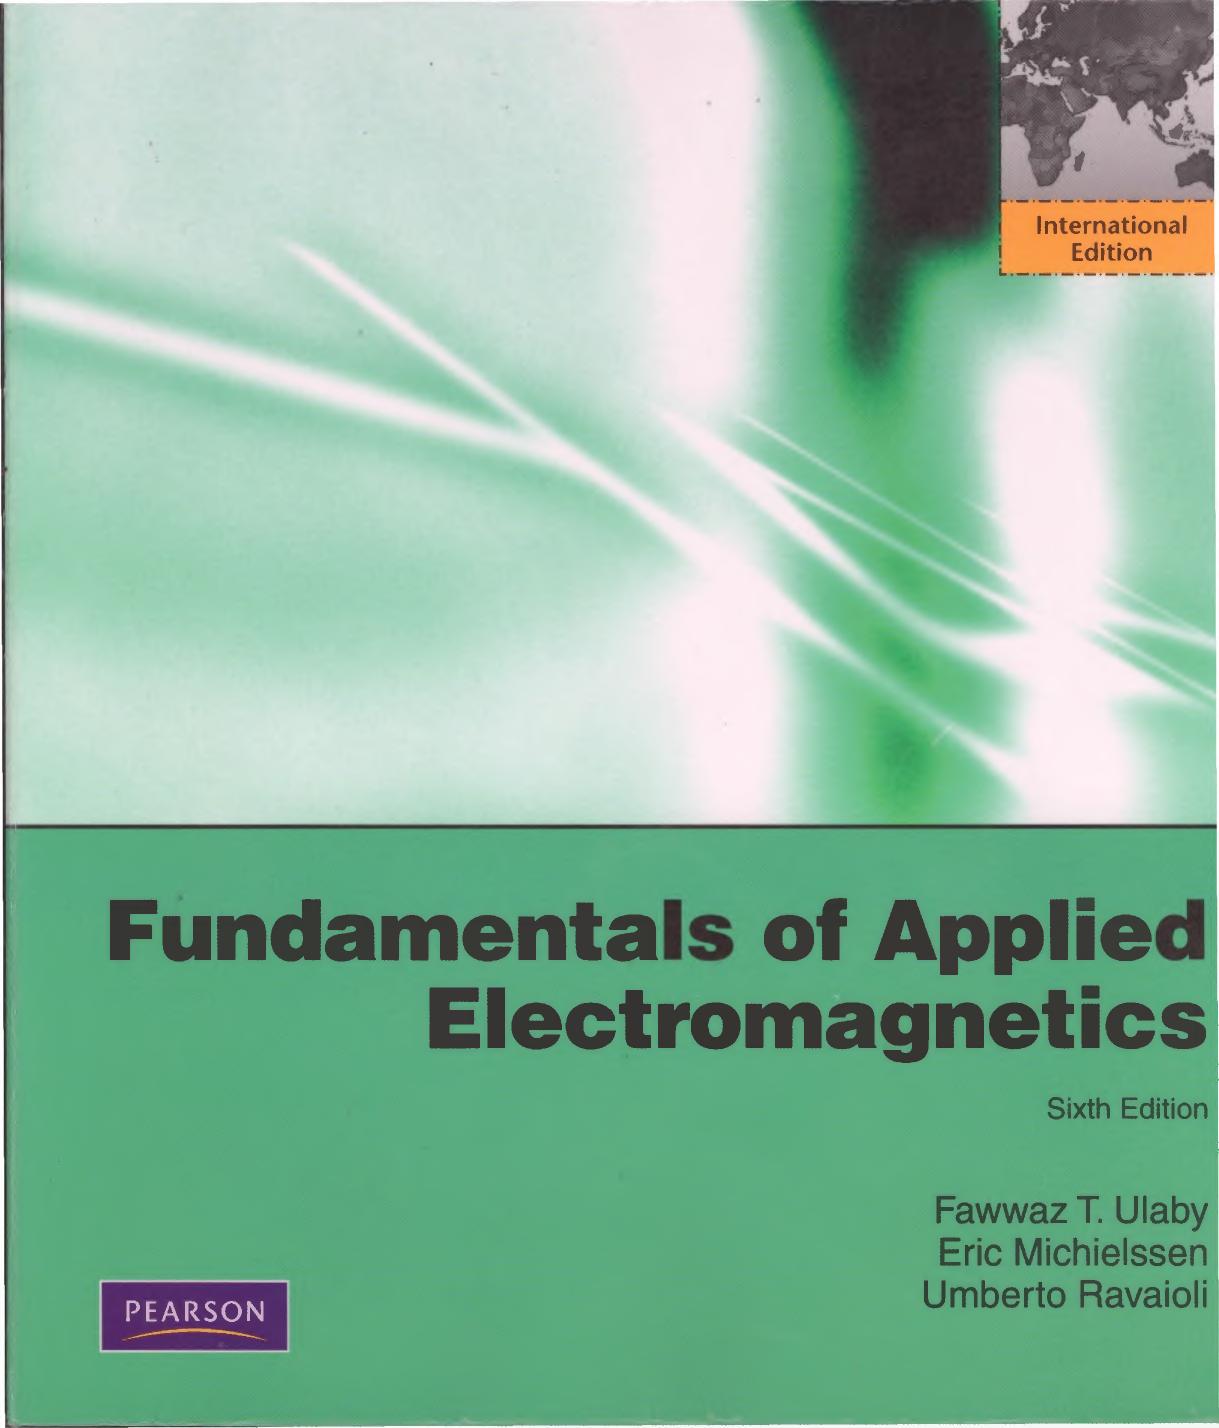 Fundamentals of Applied Electromagnetics-6th-1